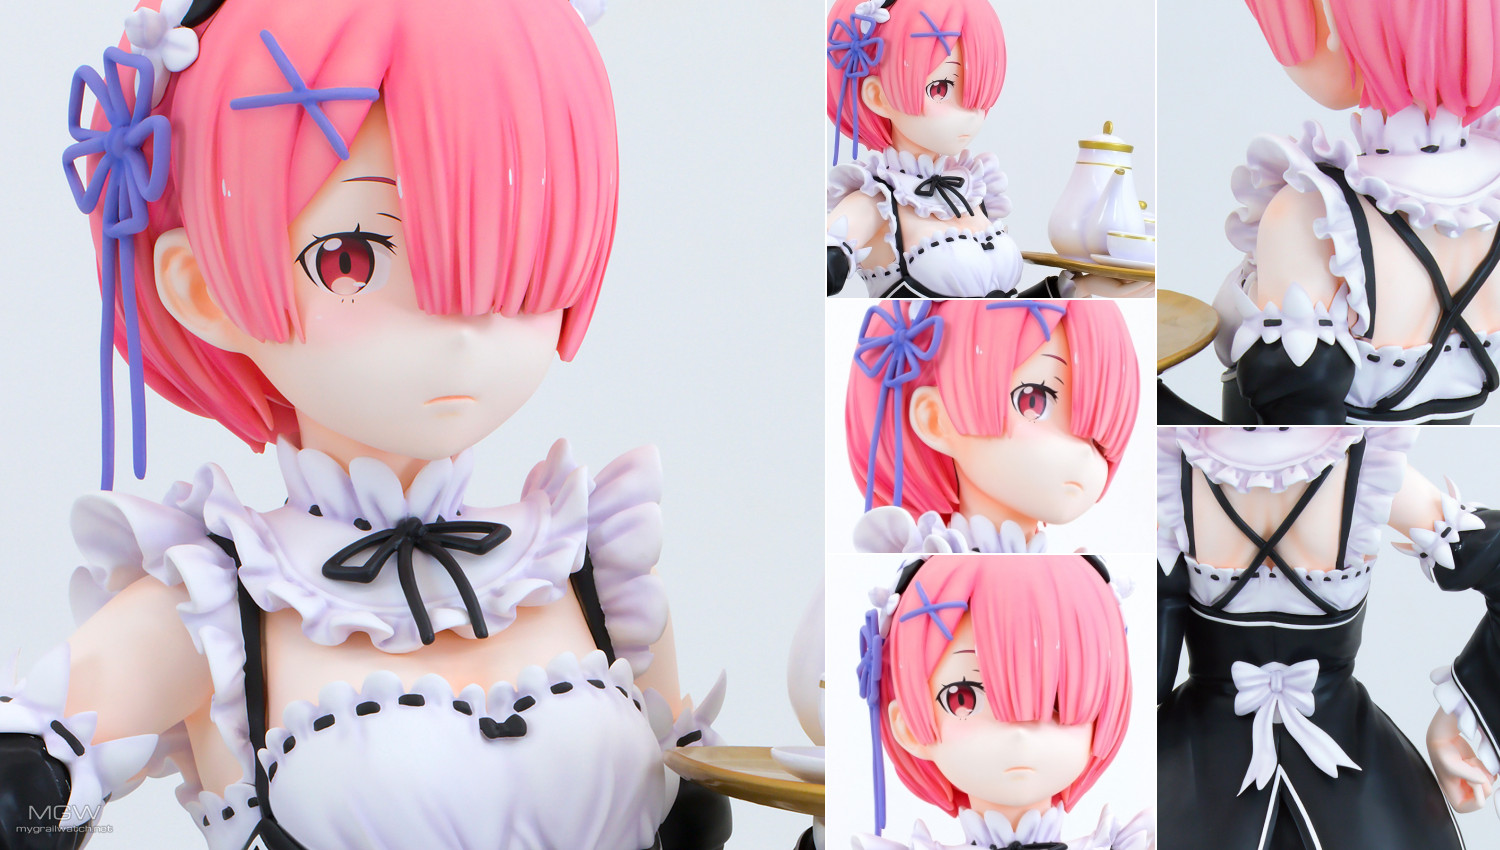 Human Scale Figure Ram by FIGÜREX from Re:ZERO -Starting Life in Another World- (Re:ゼロから始める異世界生活)